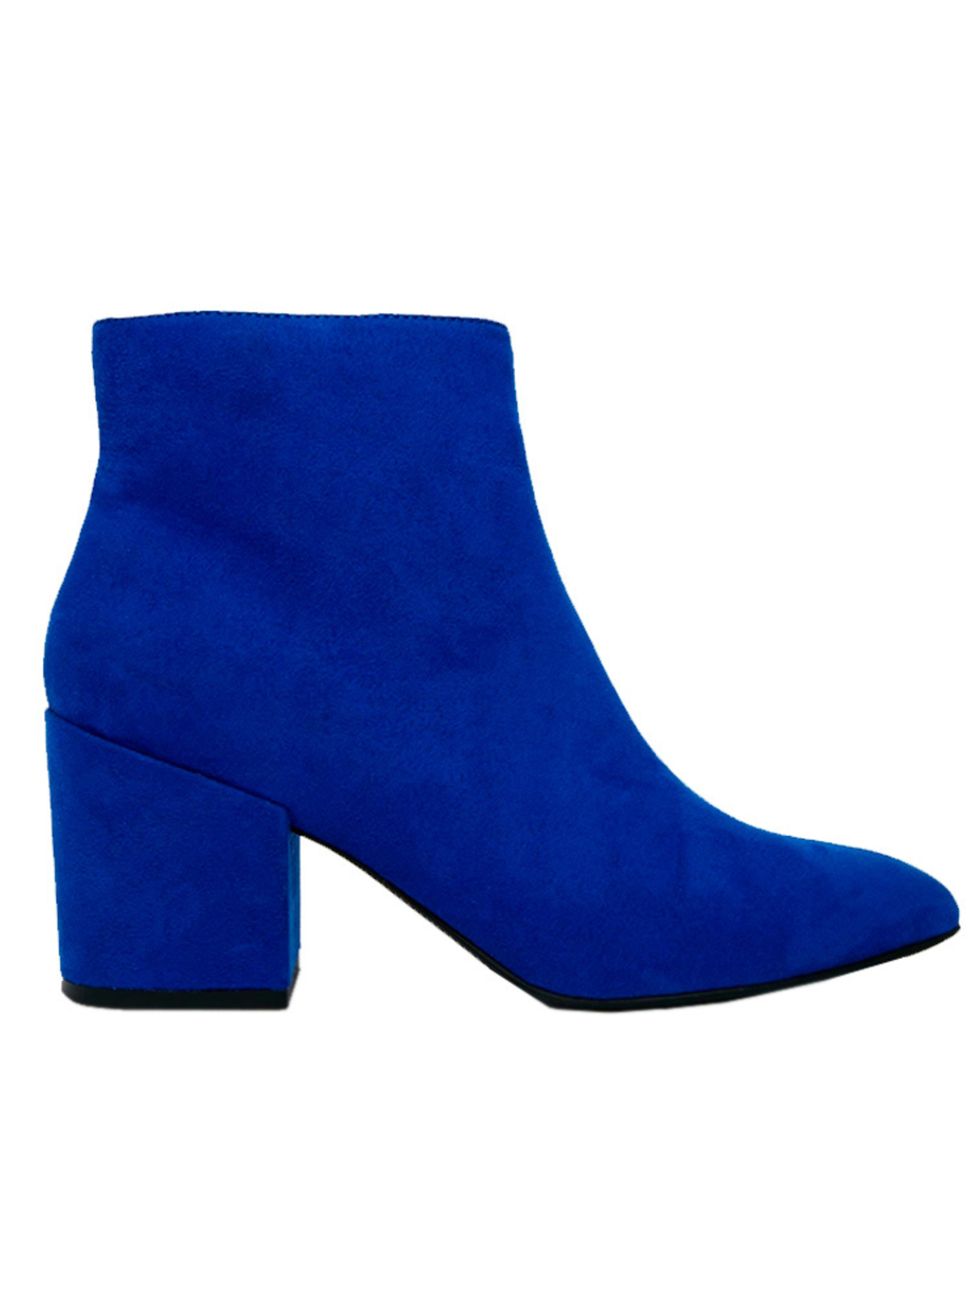 <p><a href="http://www.asos.com/pgeproduct.aspx?iid=5232074&CTAref=Saved+Items+Page" target="_blank">ASOS</a> Boots, £45</p>